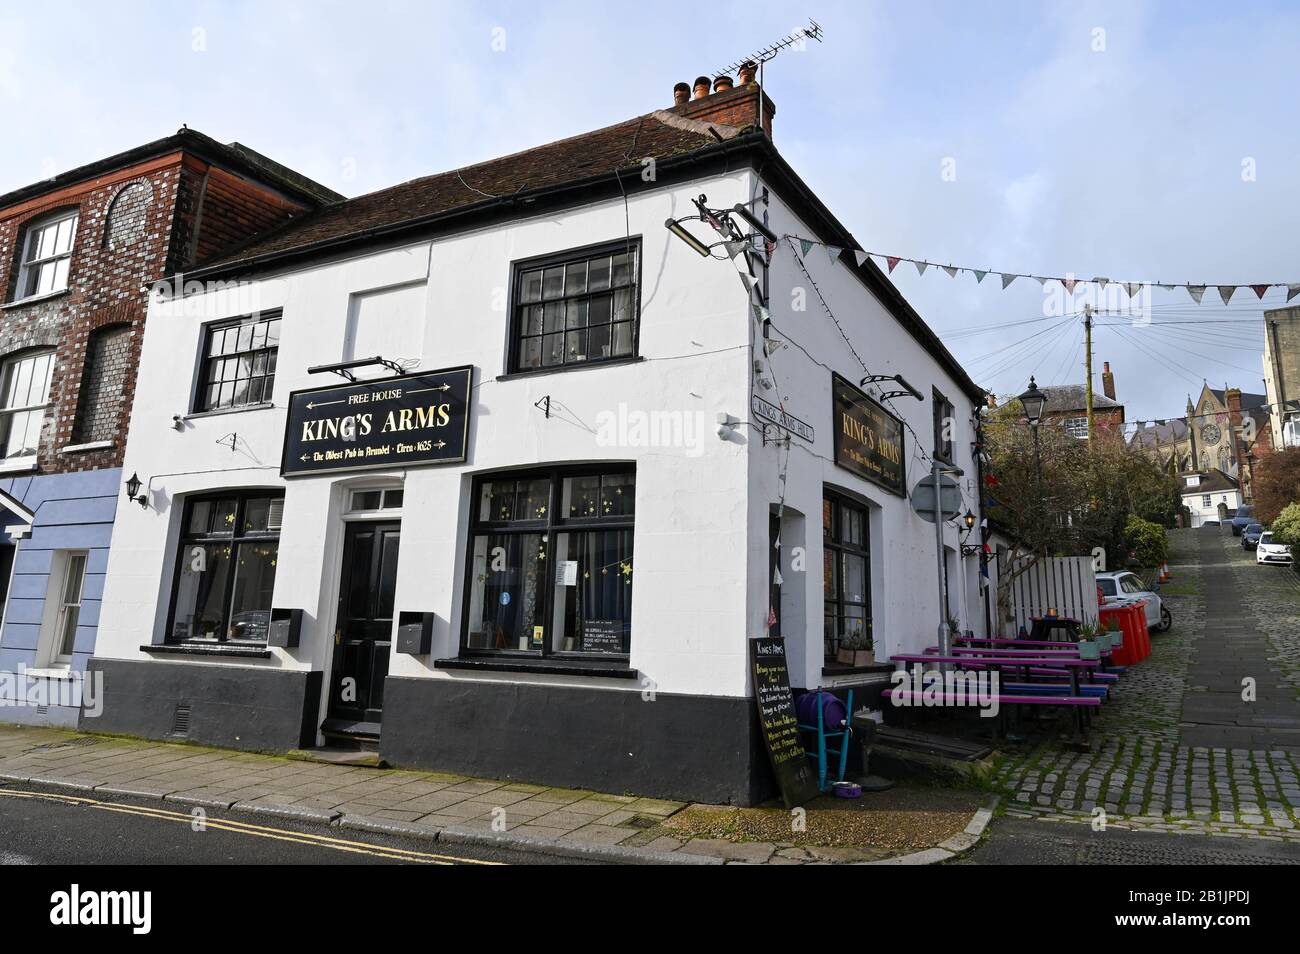 Arundel West Sussex UK - The Kings Arms pub which claims to be the oldest in the town  Photograph taken by Simon Dack Stock Photo